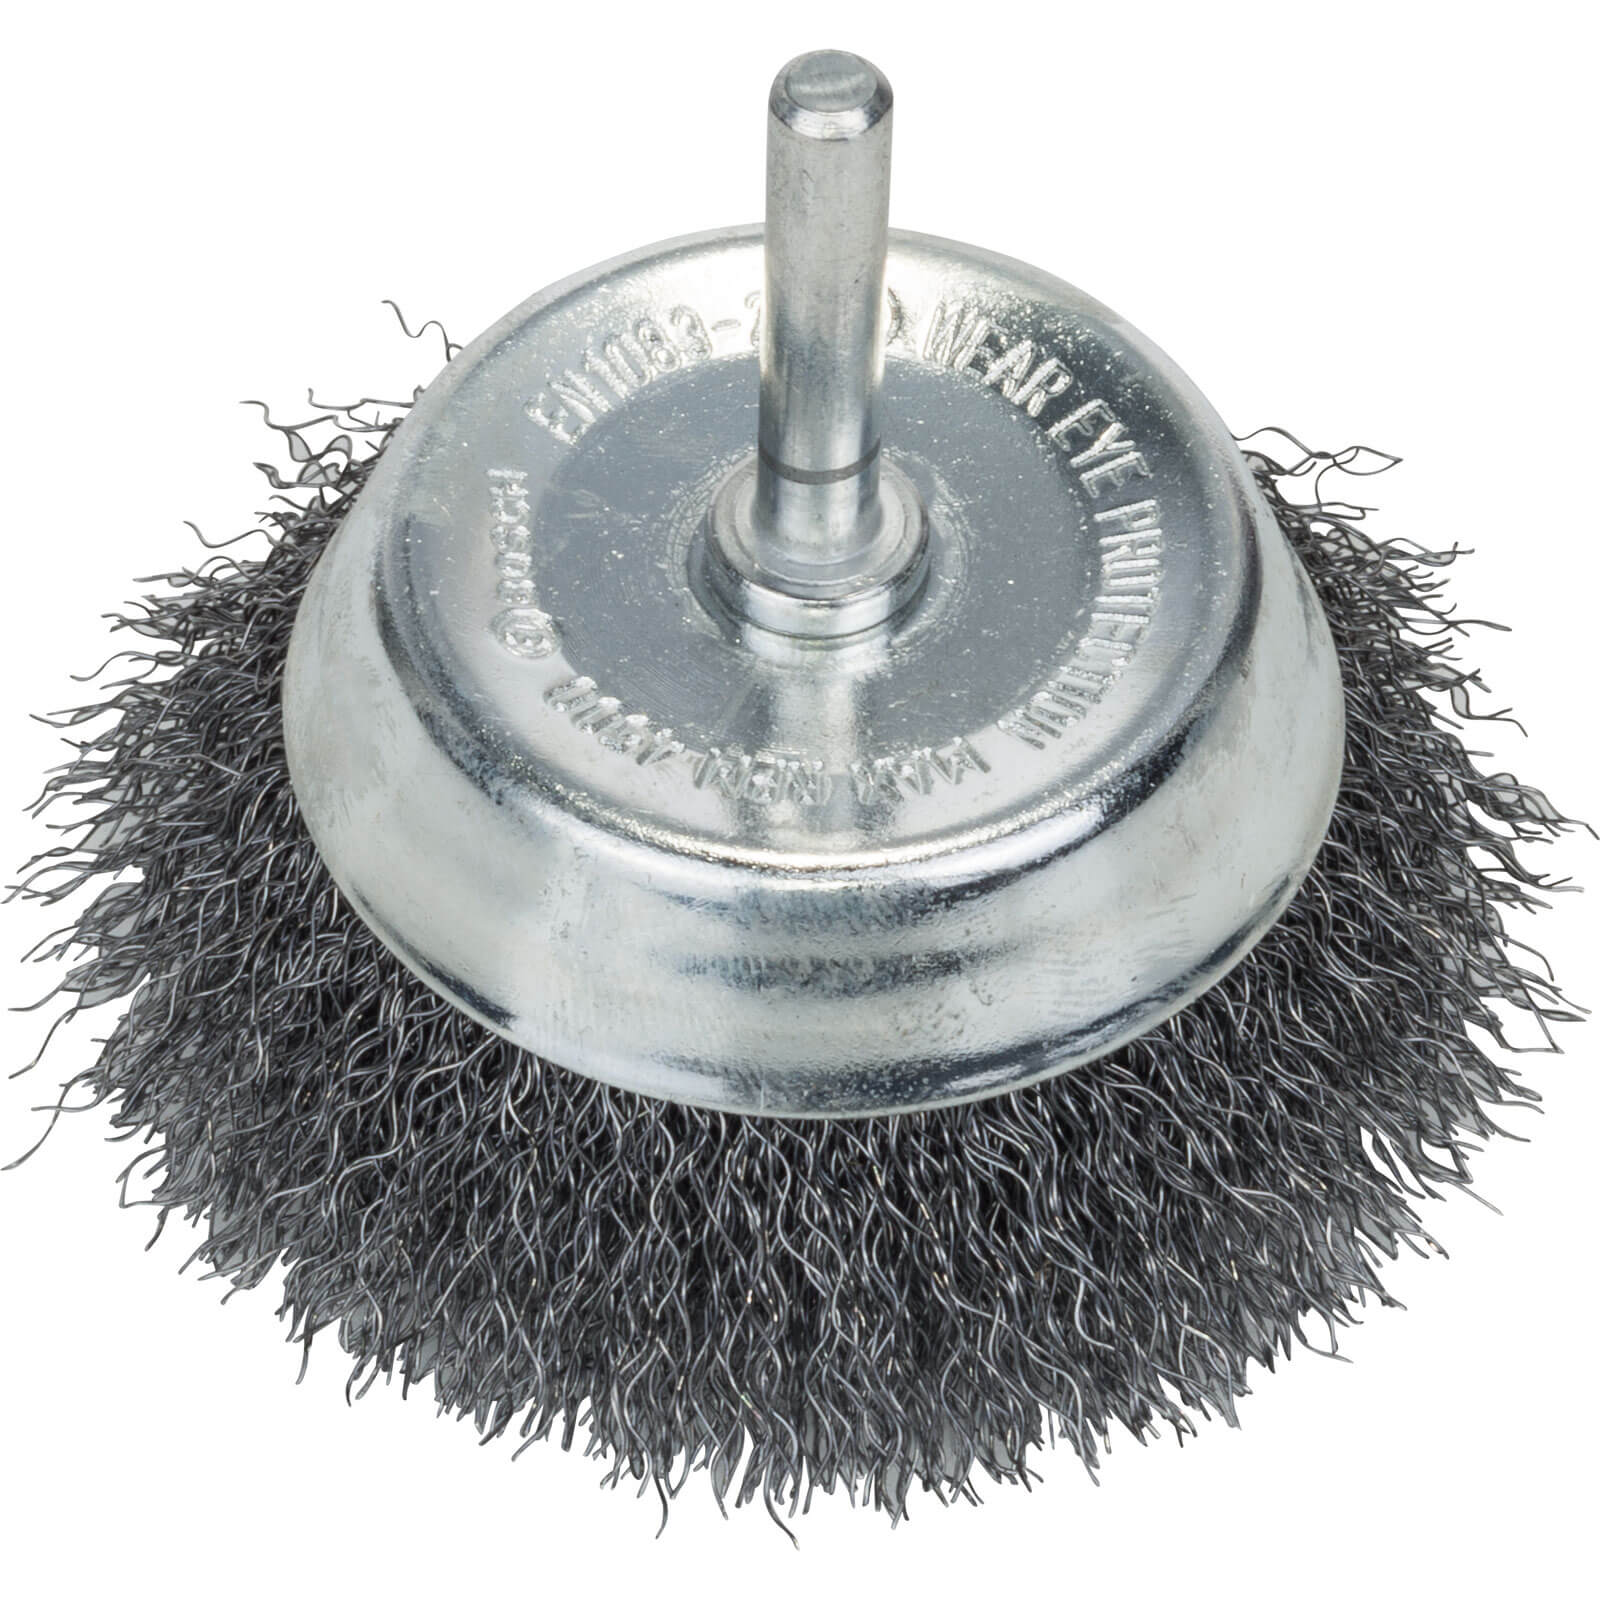 Image of Bosch 0.2mm Crimped Steel Wire Brush 70mm 6mm Shank